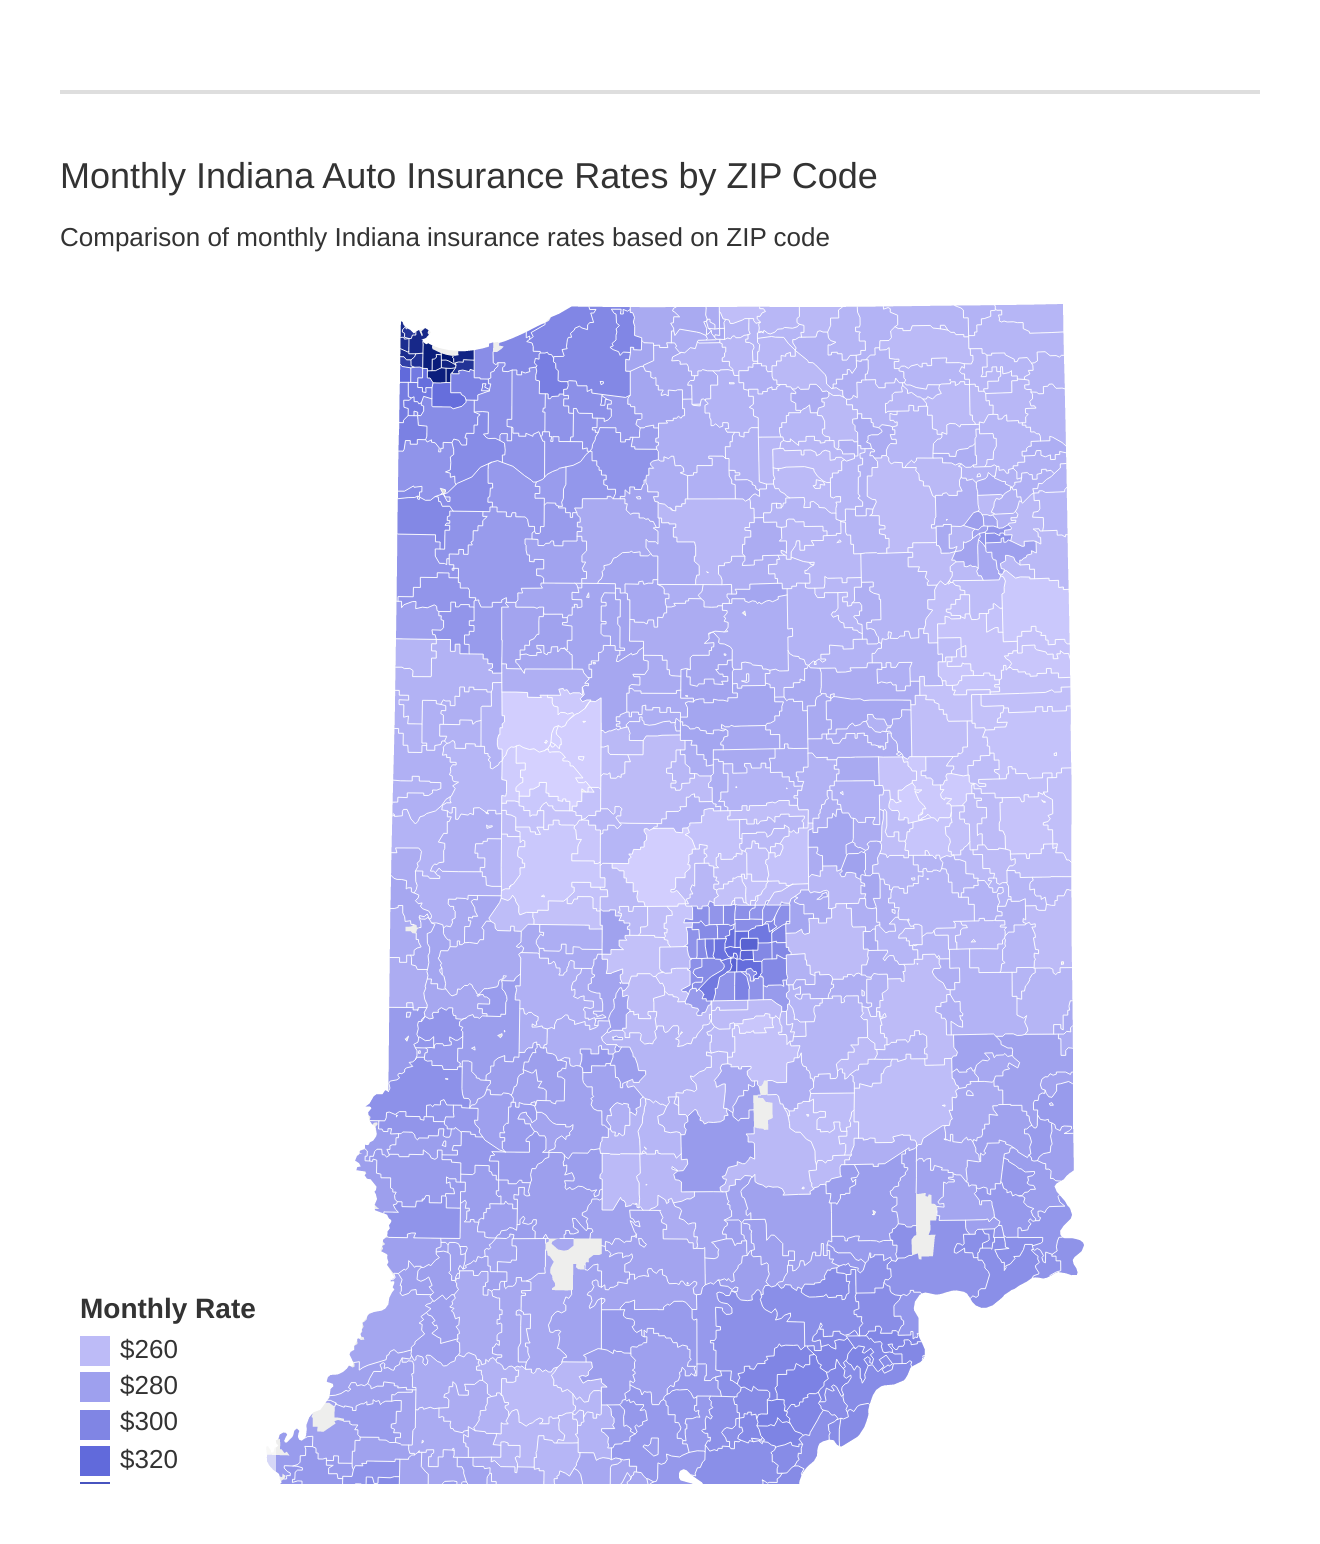 Monthly Indiana Auto Insurance Rates by ZIP Code